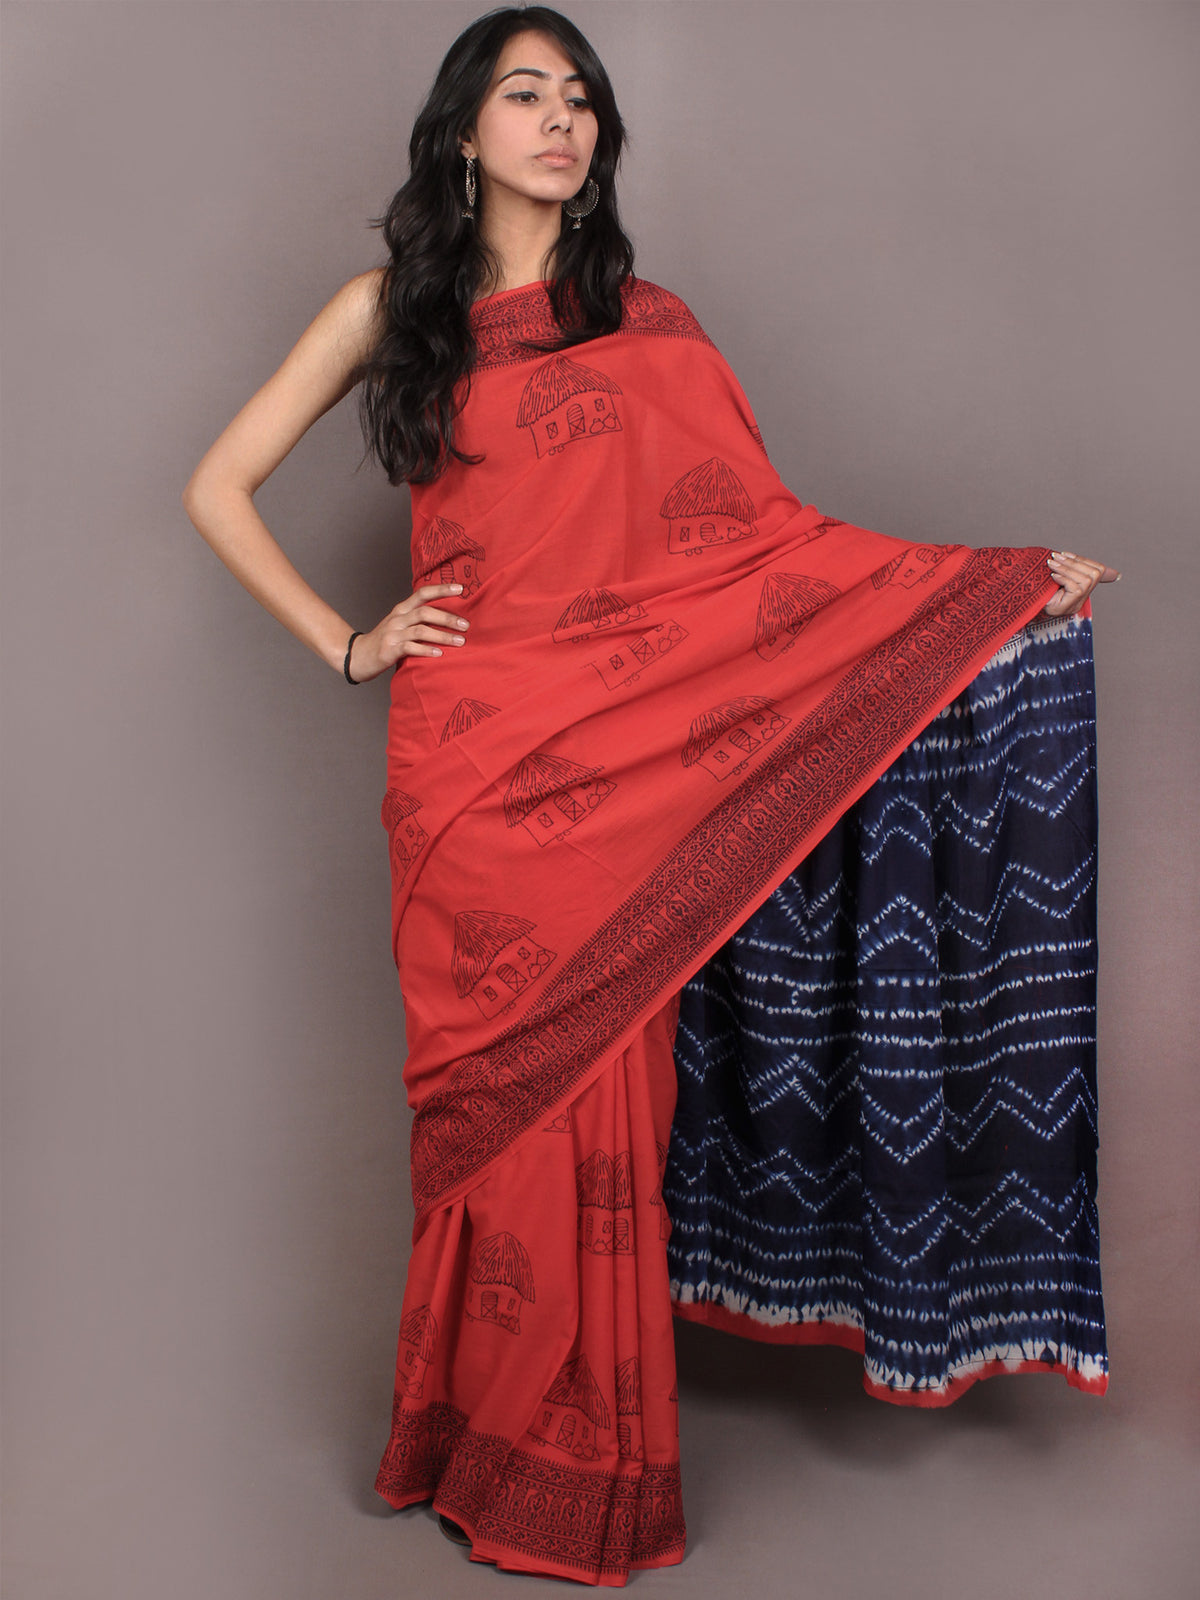 Red Indigo White Hand Block Printed Cotton Saree in Natural Colors - S03170841